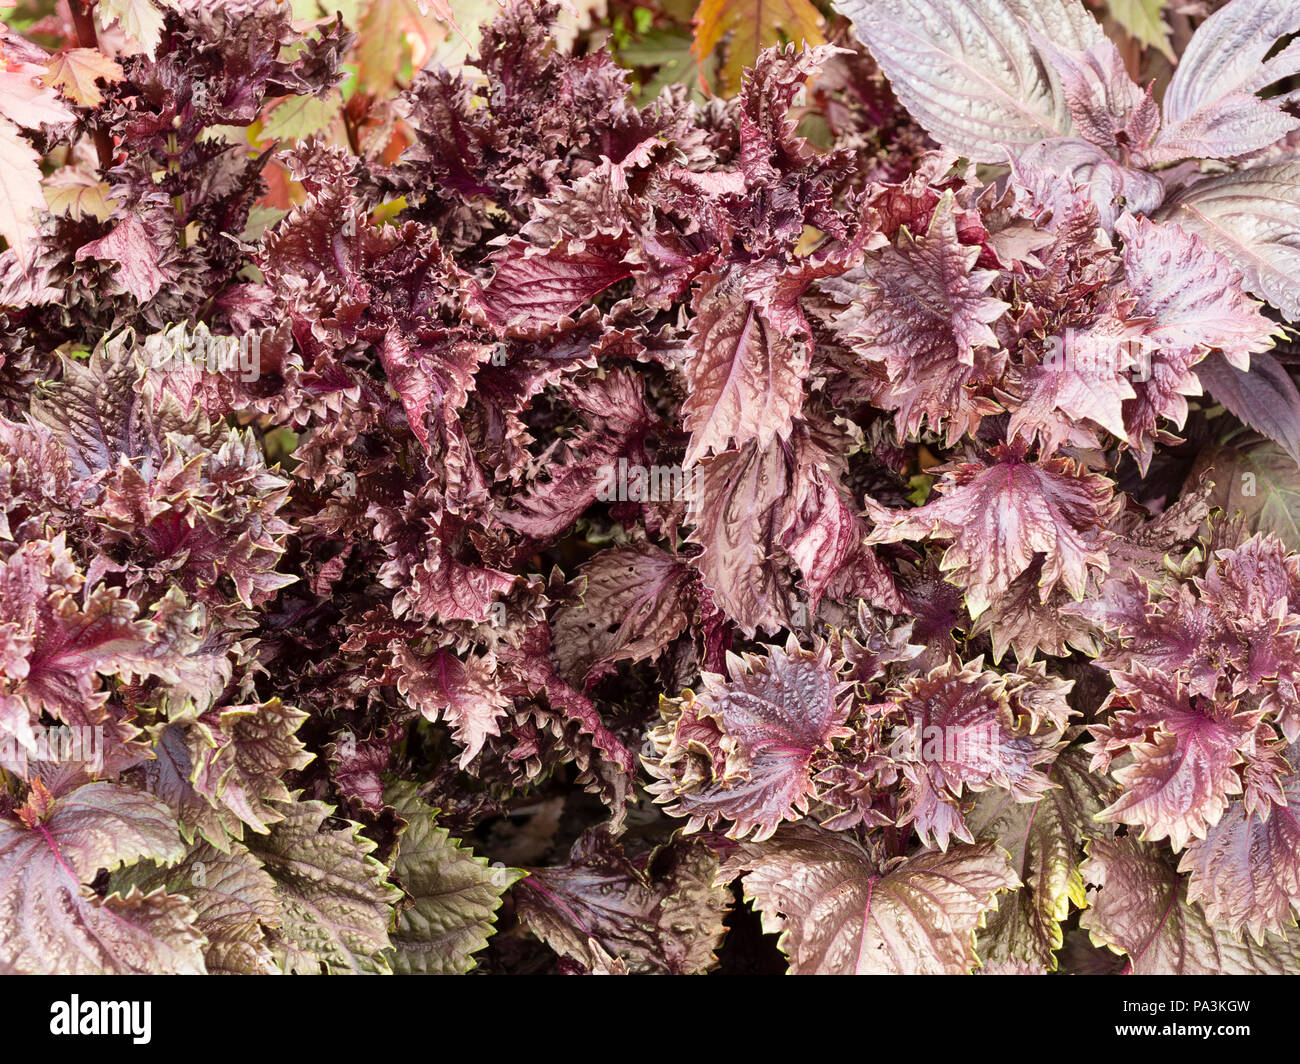 Crinkled, dark foliage of red Shiso, Perilla frutescens var. crispa, a ginger flavoured annual culinary herb Stock Photo